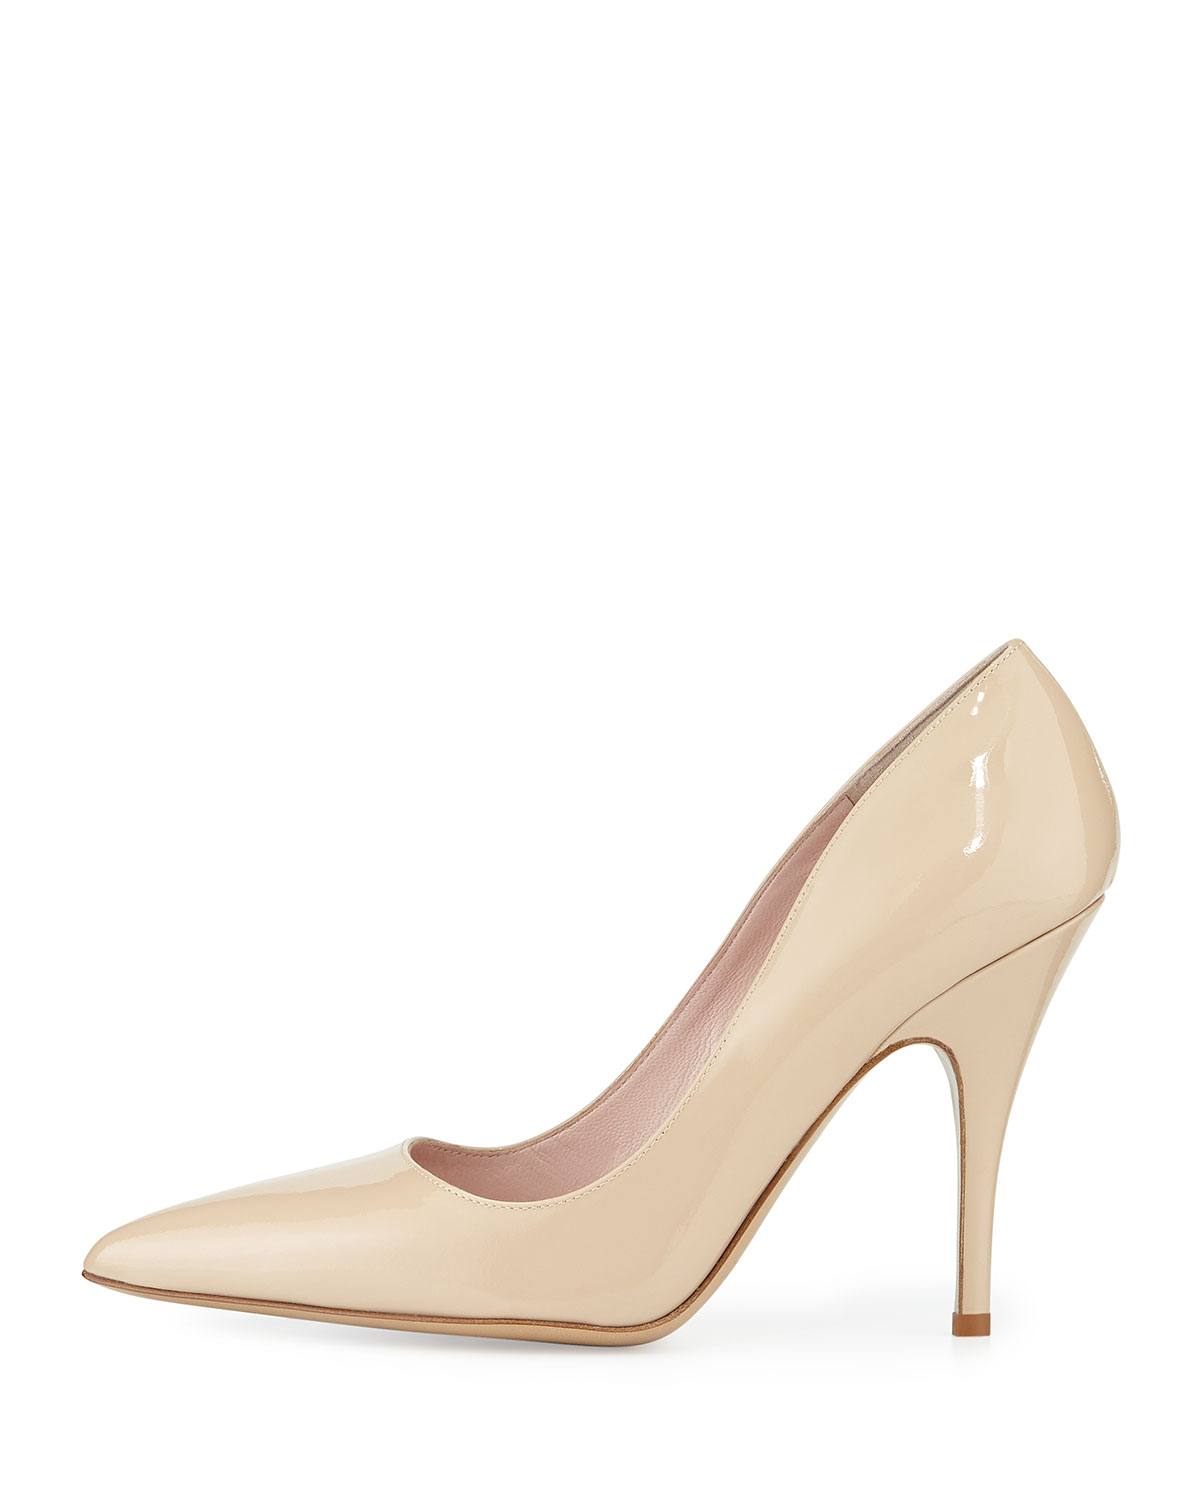 Kate spade Licorice Patent Leather Point-toe Pump in Beige (powder) | Lyst